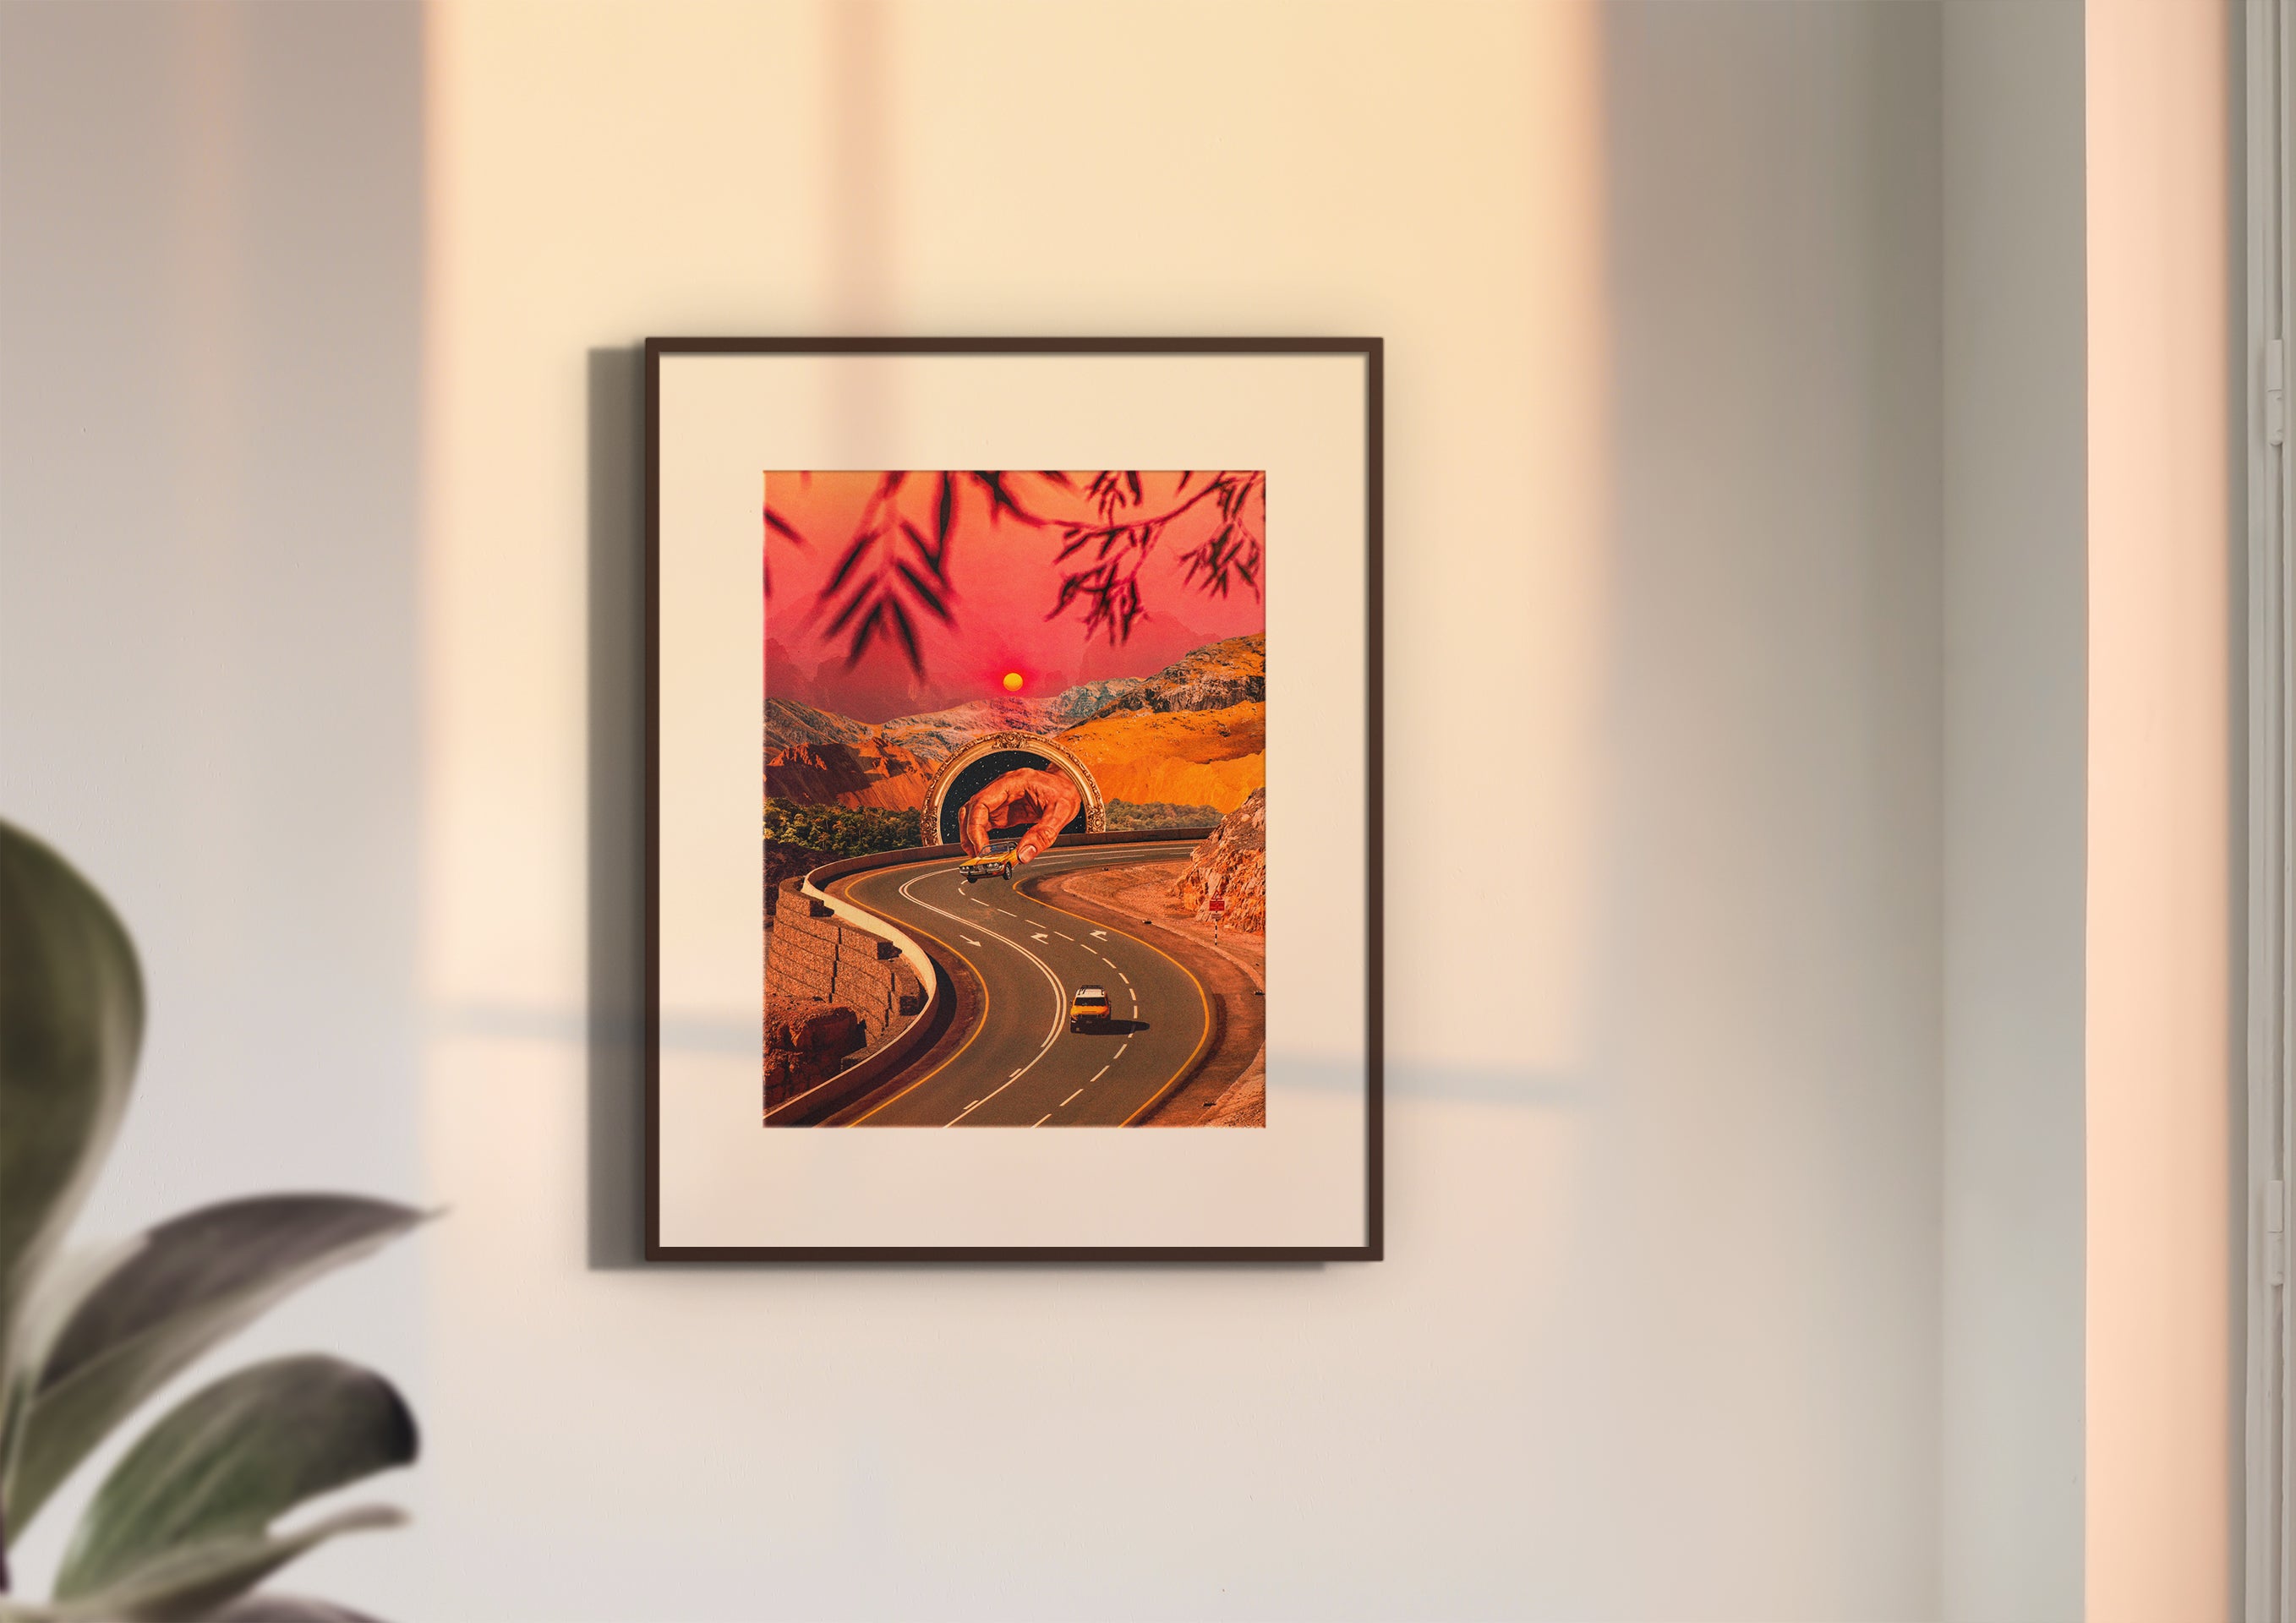 A framed print of Play Time hanging on the wall. A green plan is visible in the bottom left corner. The sundown outside creates a magical effect inside.